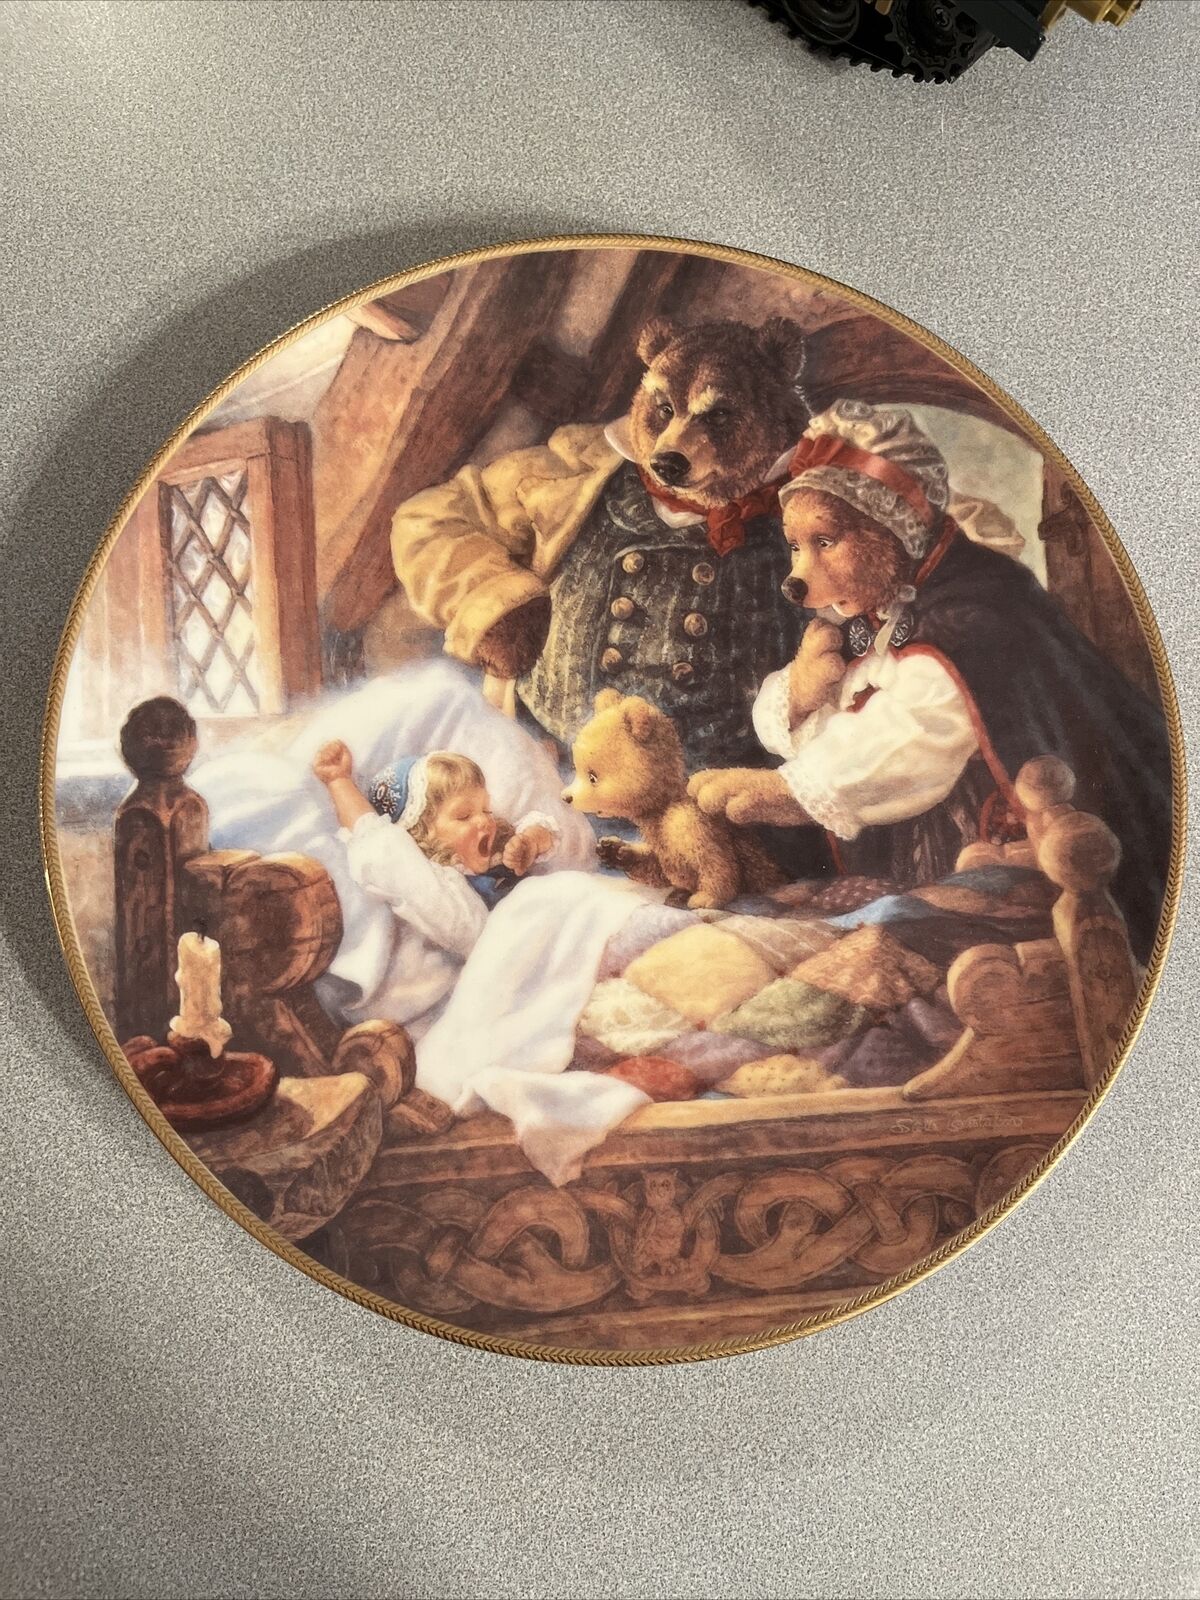 Edwin M Knowles Classic Fairytale Collector Plate Goldilocks And The Three Bears